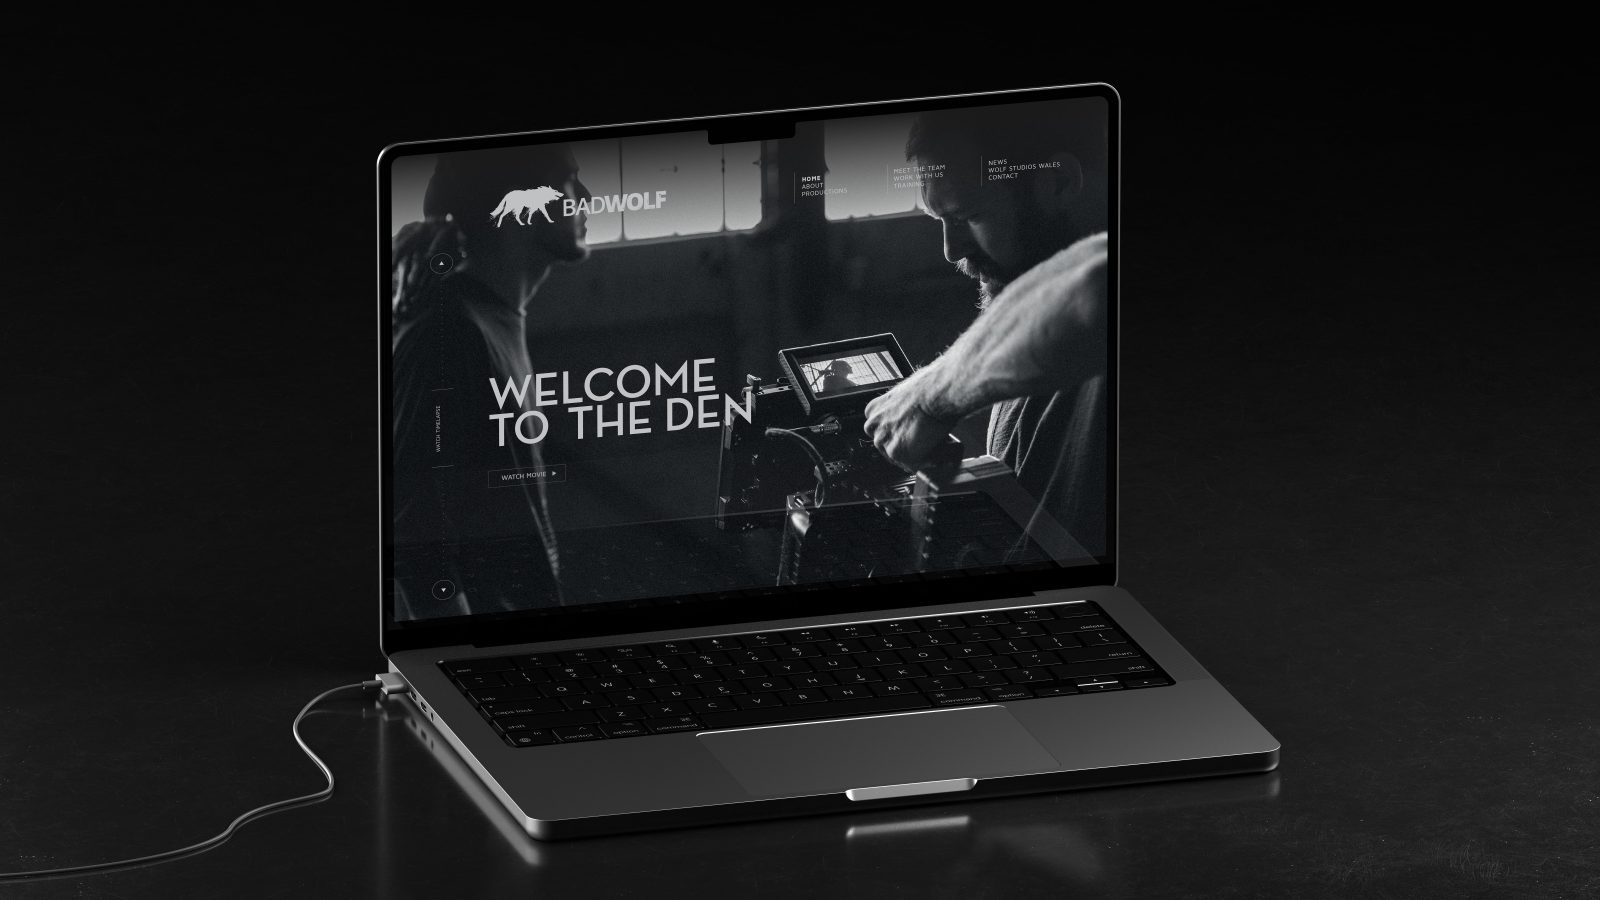 A laptop on a dark surface displaying a welcome screen with the text 